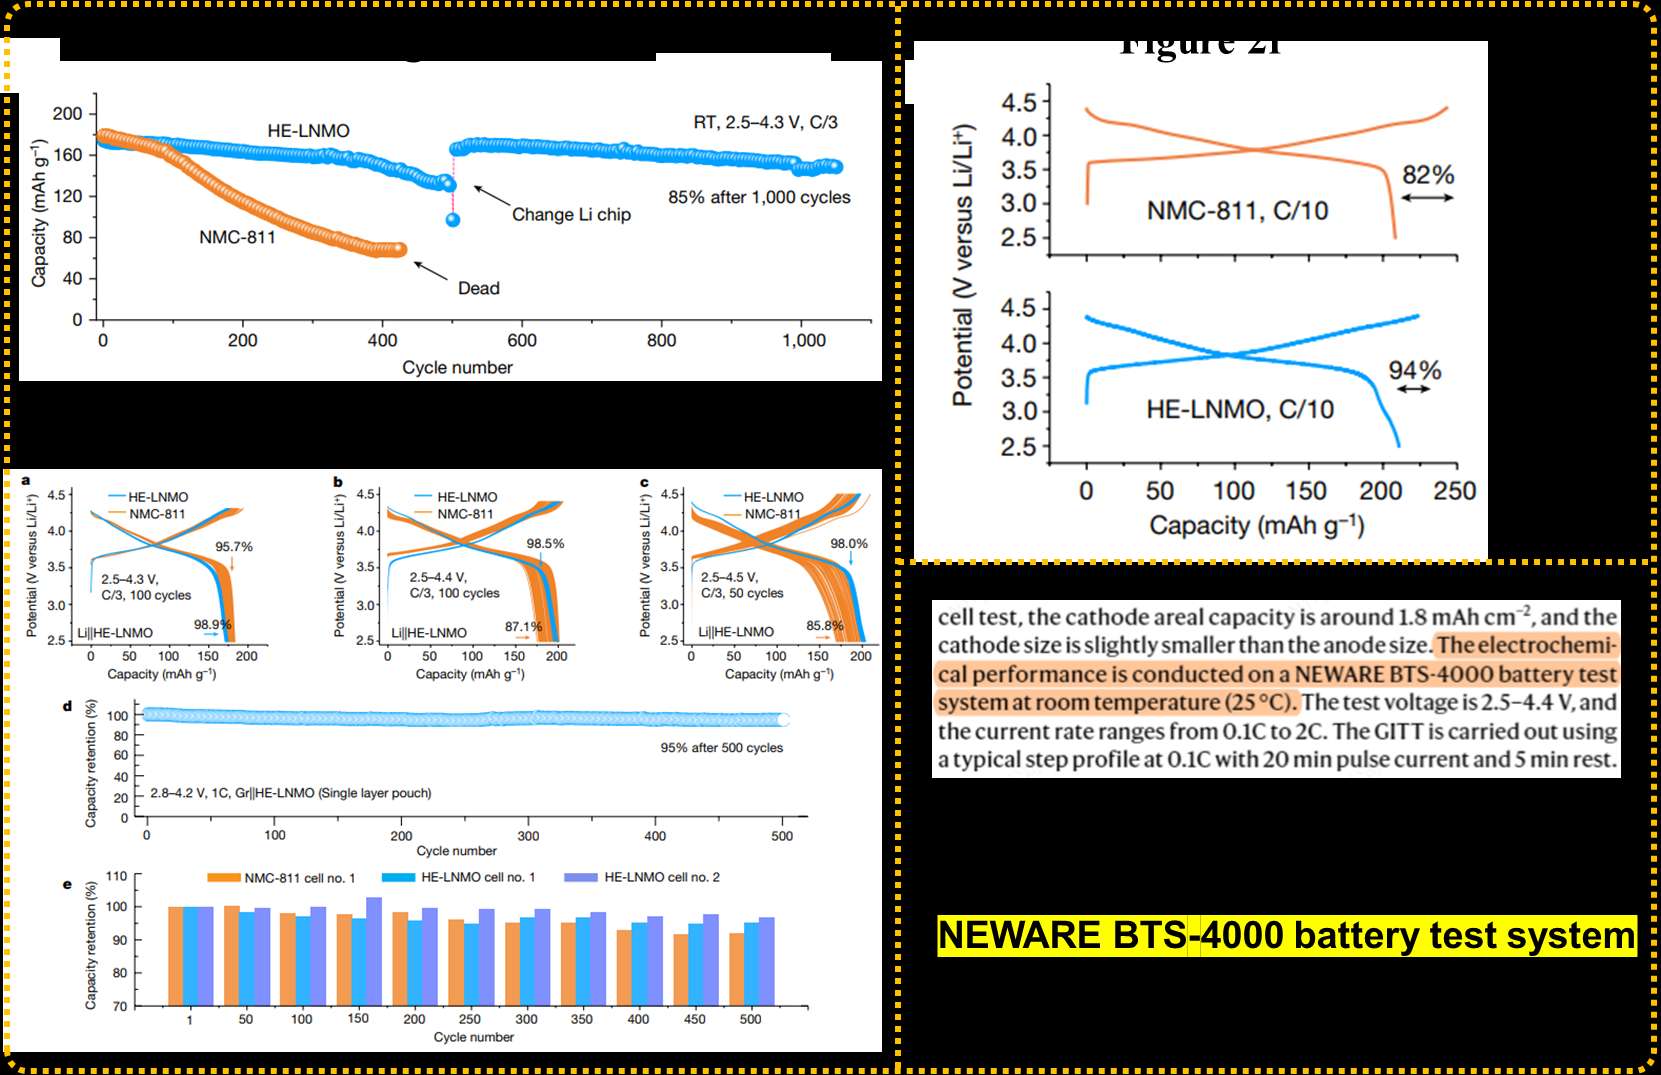 electrochemical performance of a series of batteries shown in Figure 1c, 2f, and 3a-3e in this article was tested using the Neware BTS-4000 battery test system